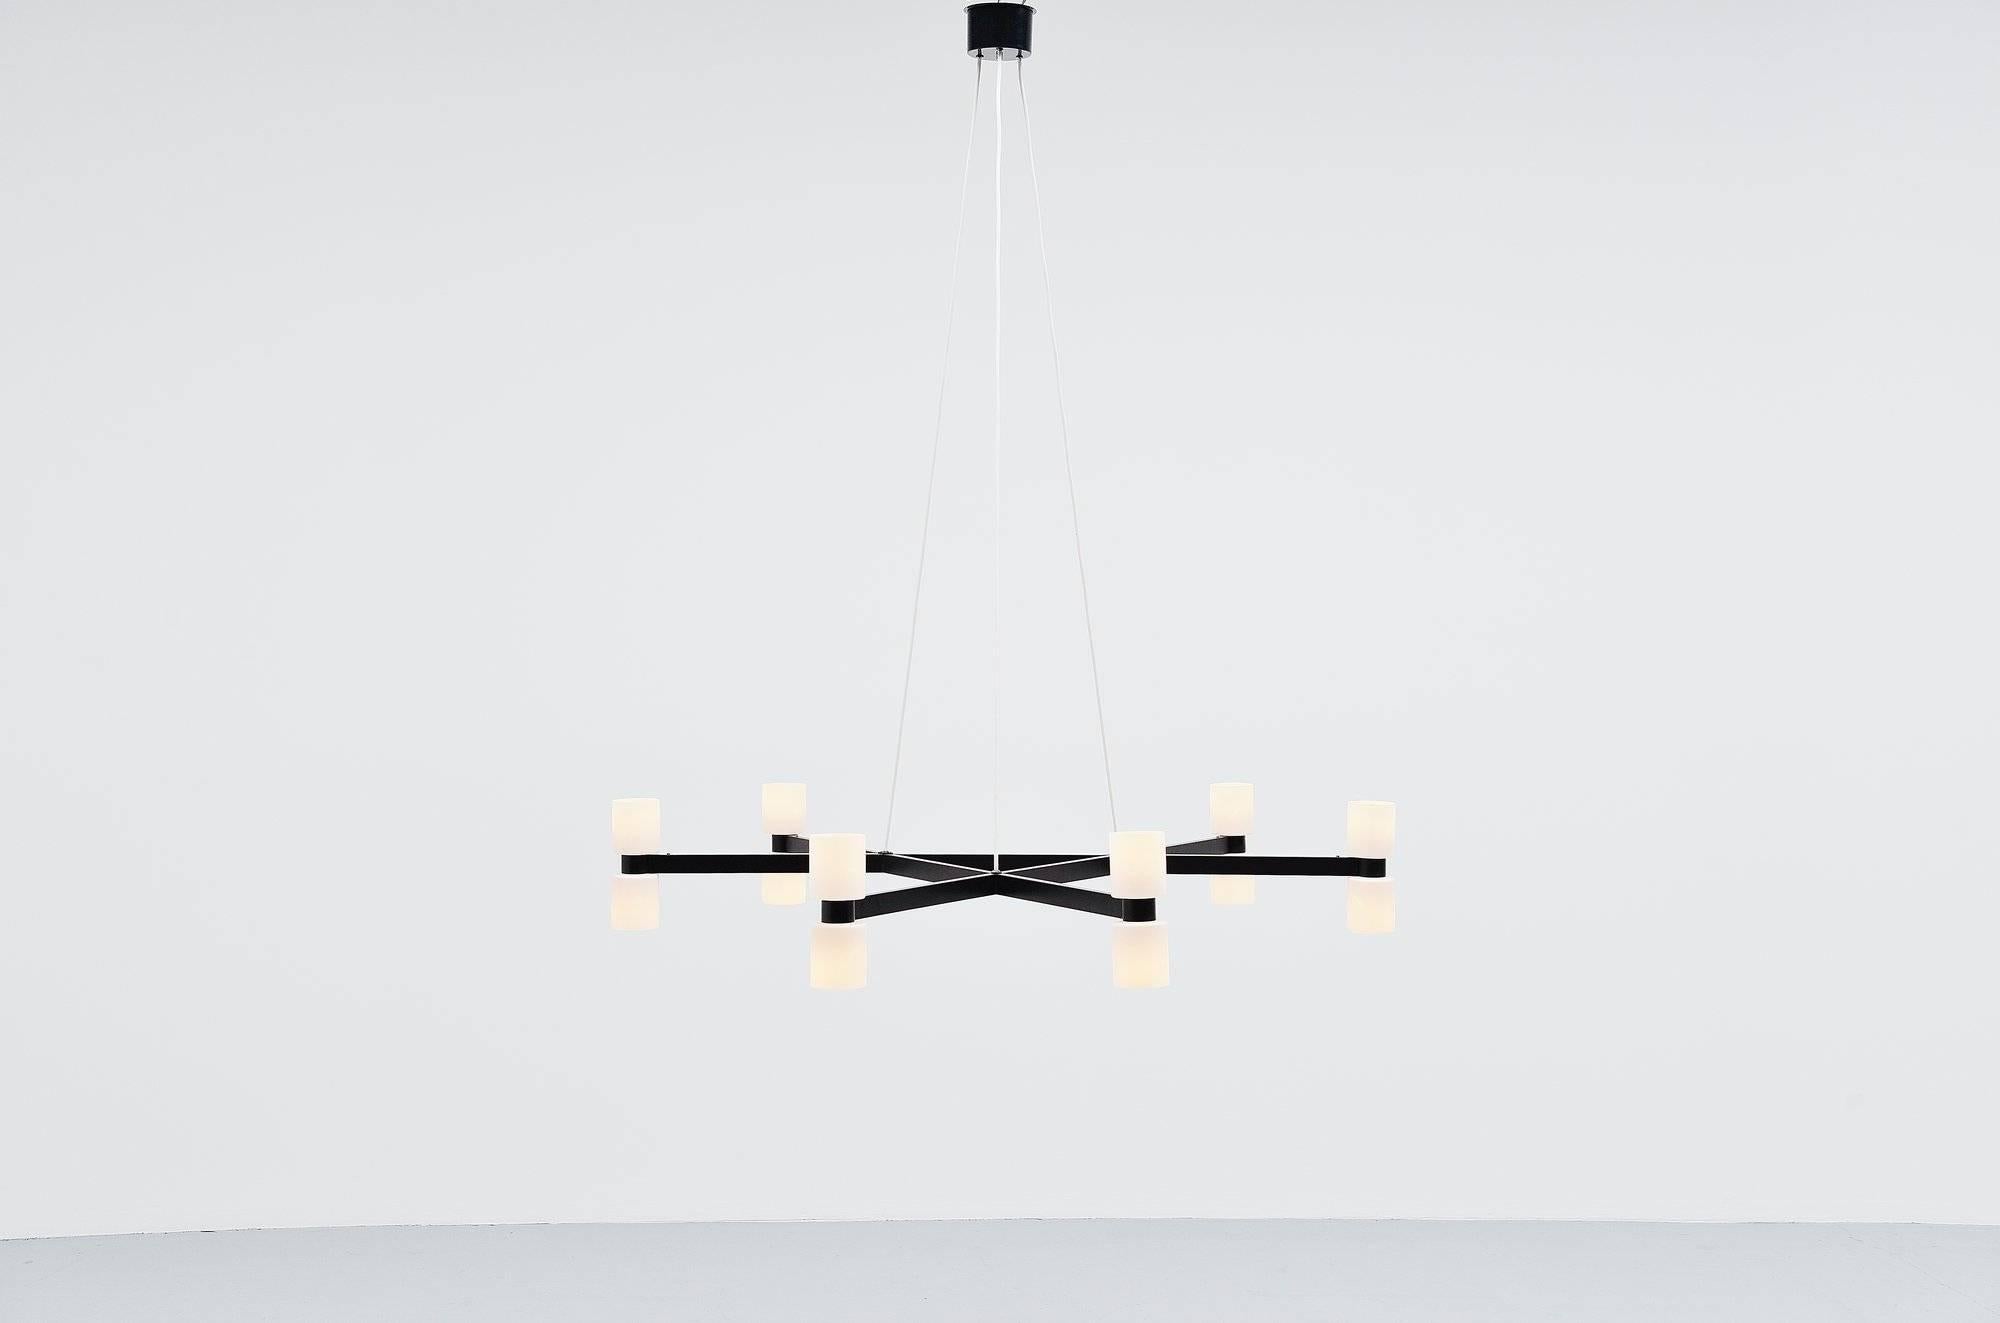 Extremely large chandelier designed by J.W. Bosman and manufactured by RAAK Amsterdam, Holland 1965. These lamps have a large star shaped frame made of black painted metal, the frame hands on three electrical white wires and the ceiling plate is